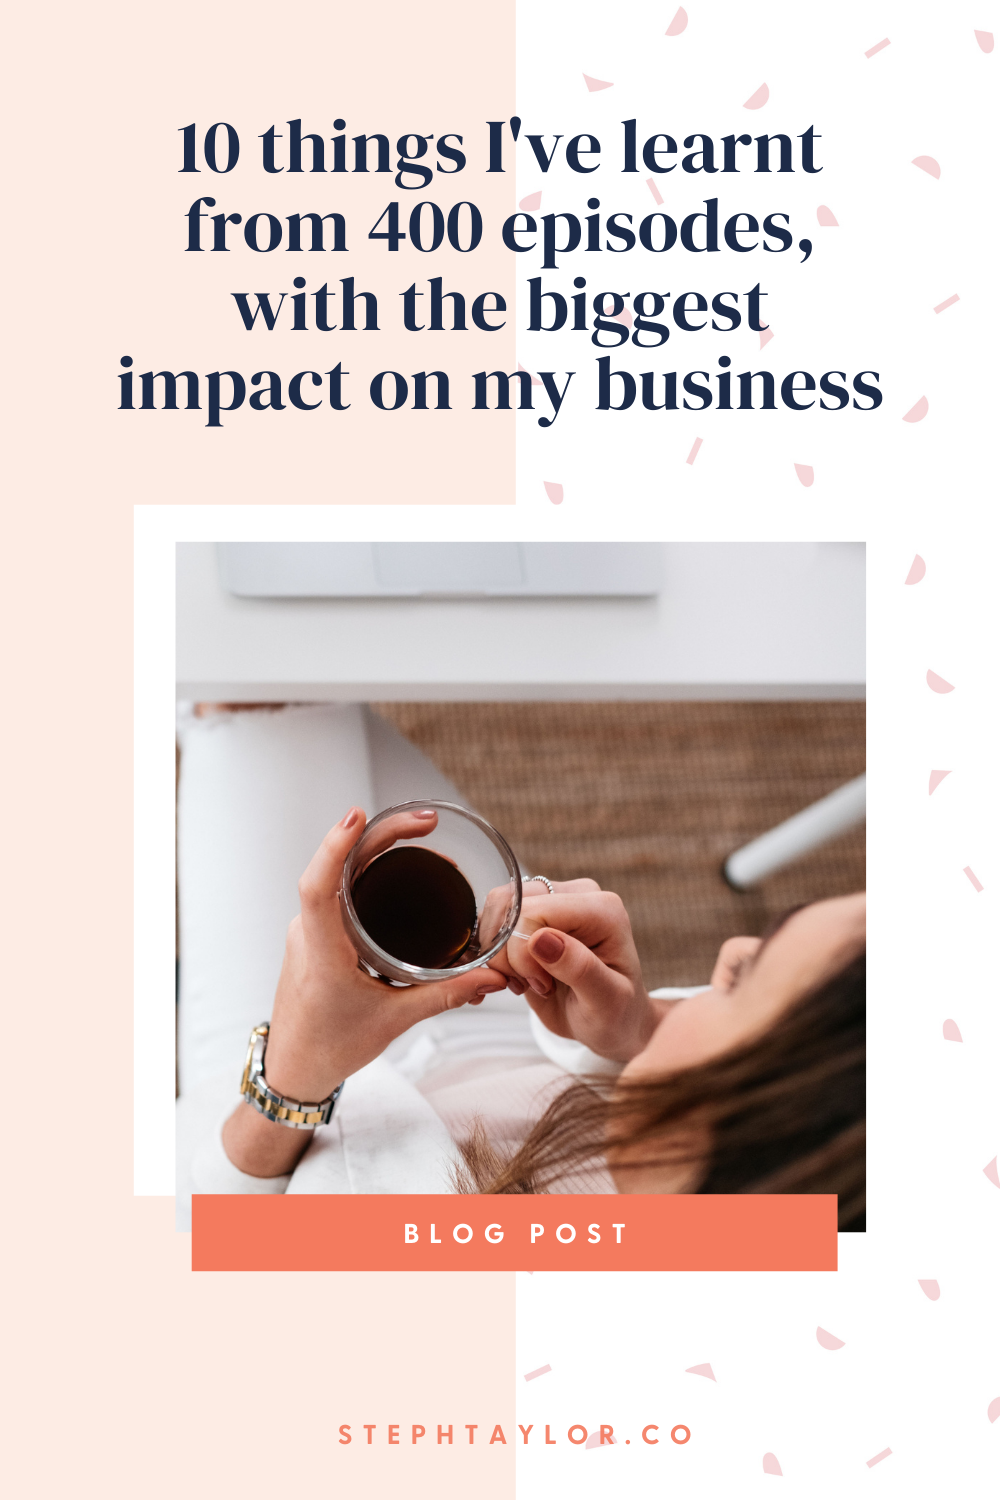 10 things Ive learnt to make the biggest impact in my business